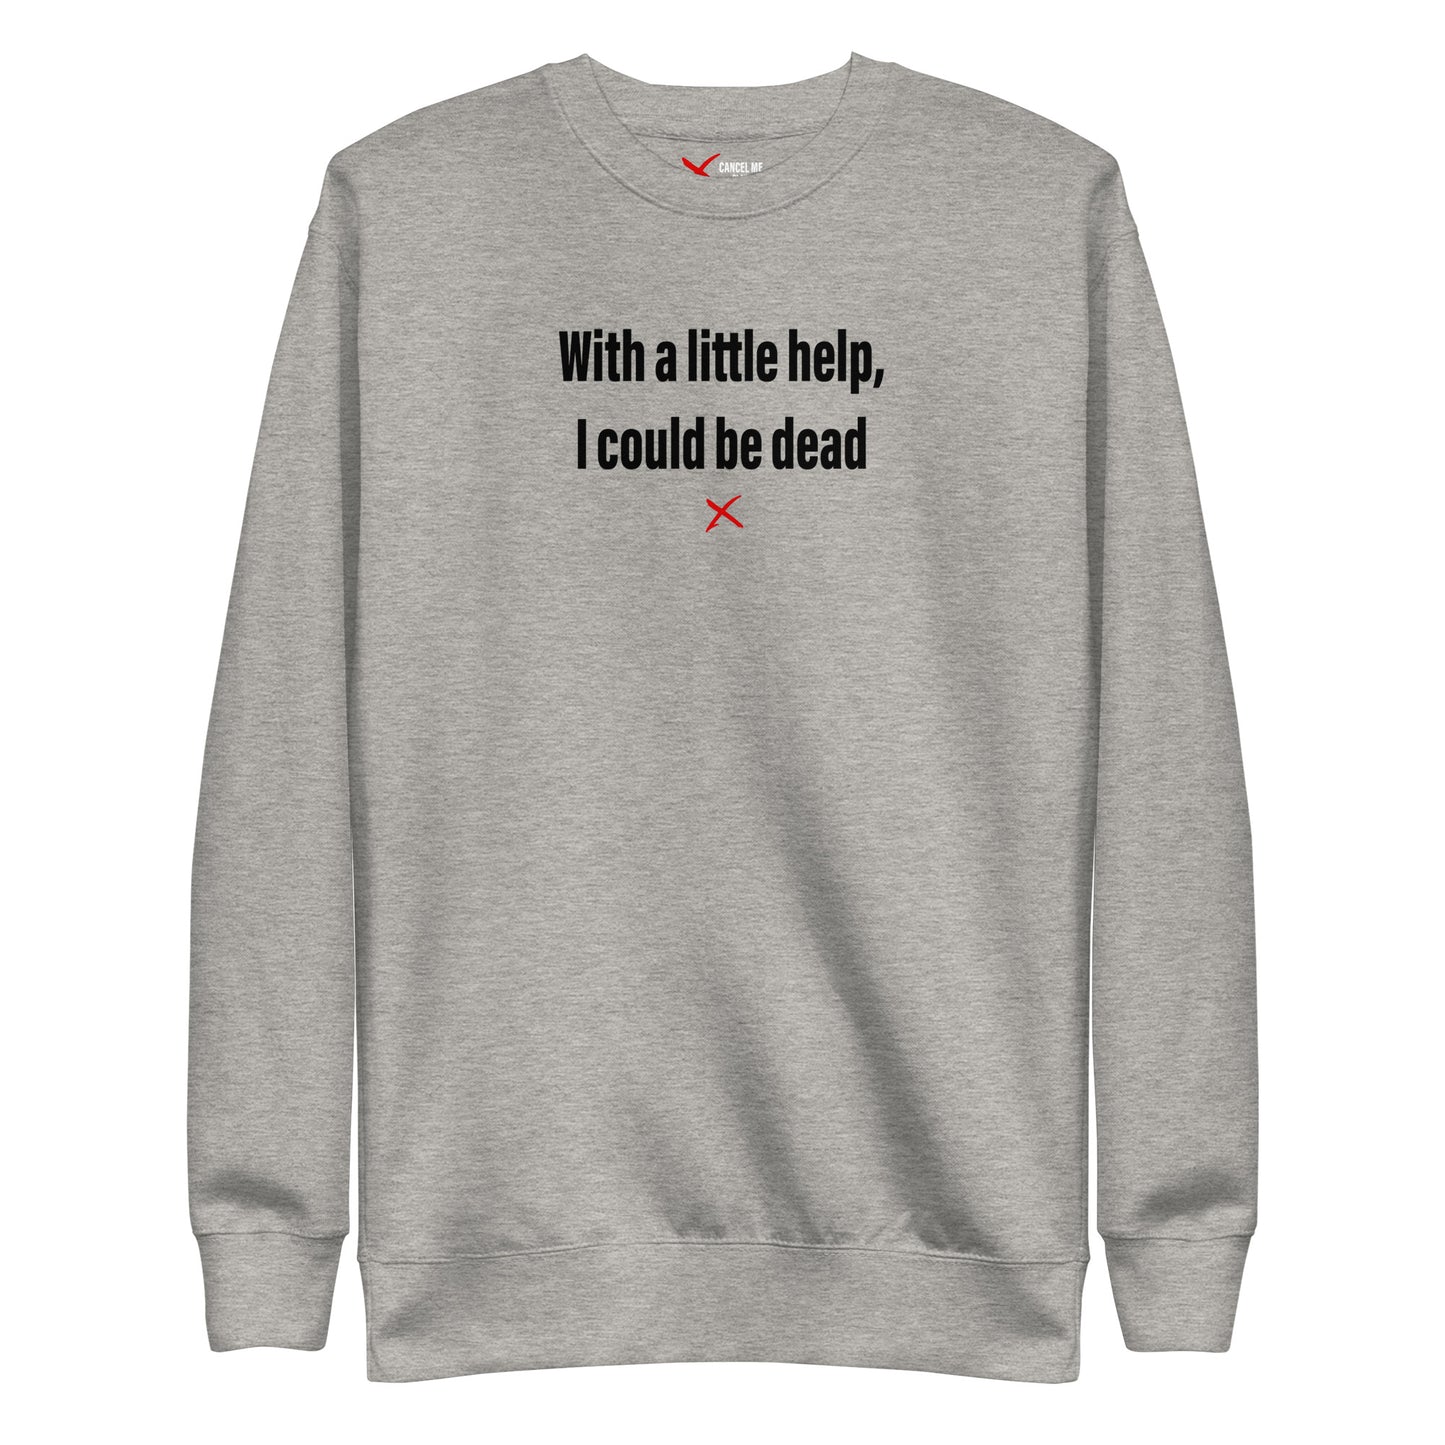 With a little help, I could be dead - Sweatshirt